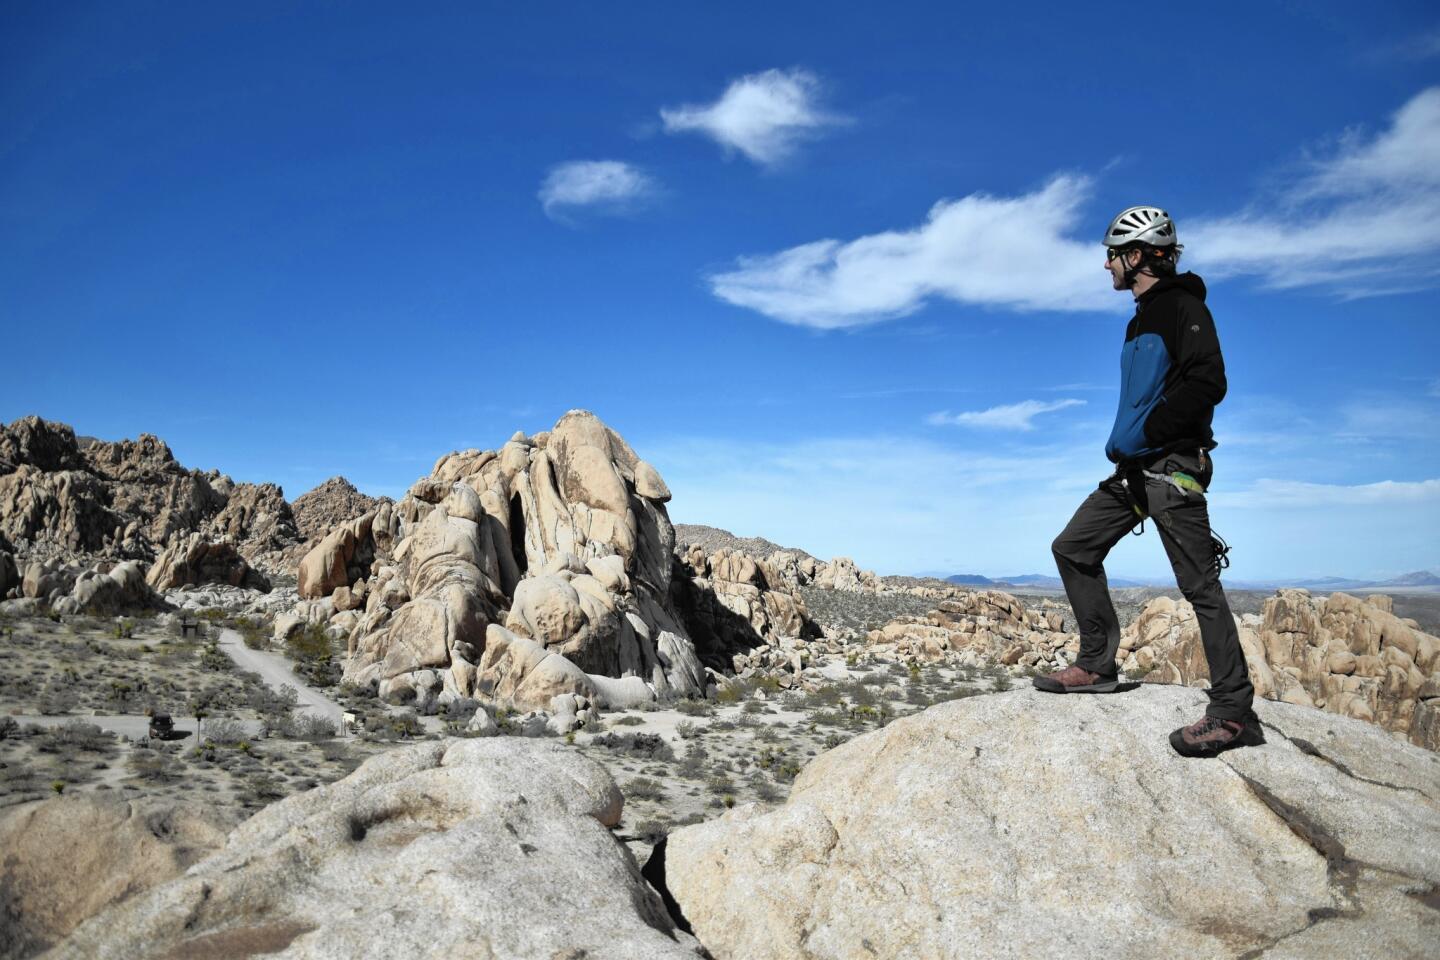 Roddy McCalley of Cliffhanger Guides stands on top of Pixie Rock in Joshua Tree National Park.